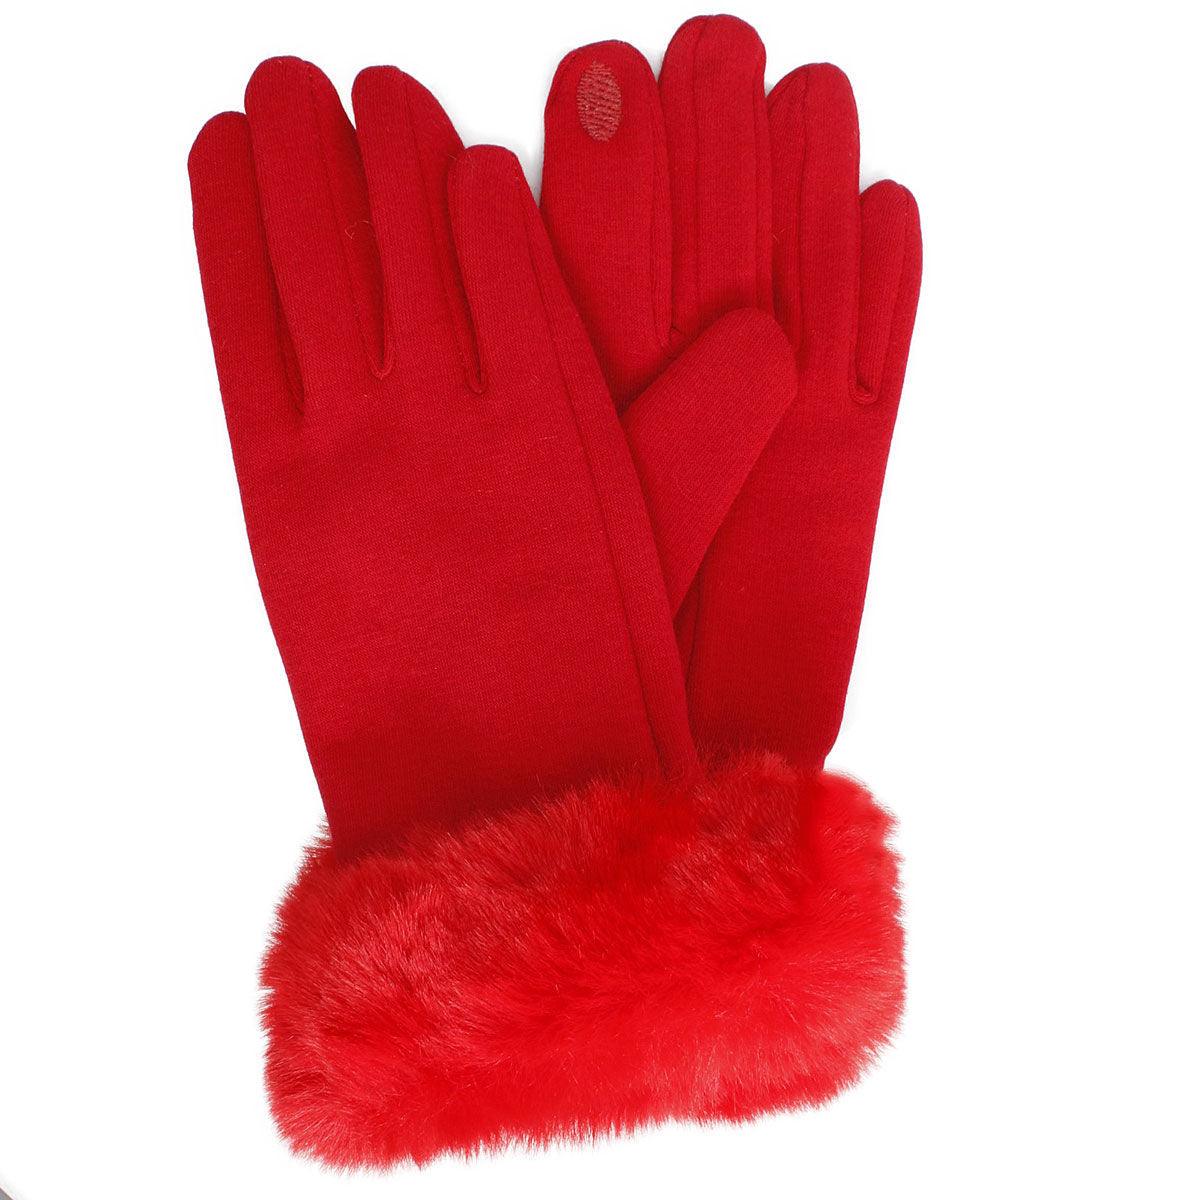 Warm and Stylish: Red Women's Gloves with Faux Fur Cuff for Winter